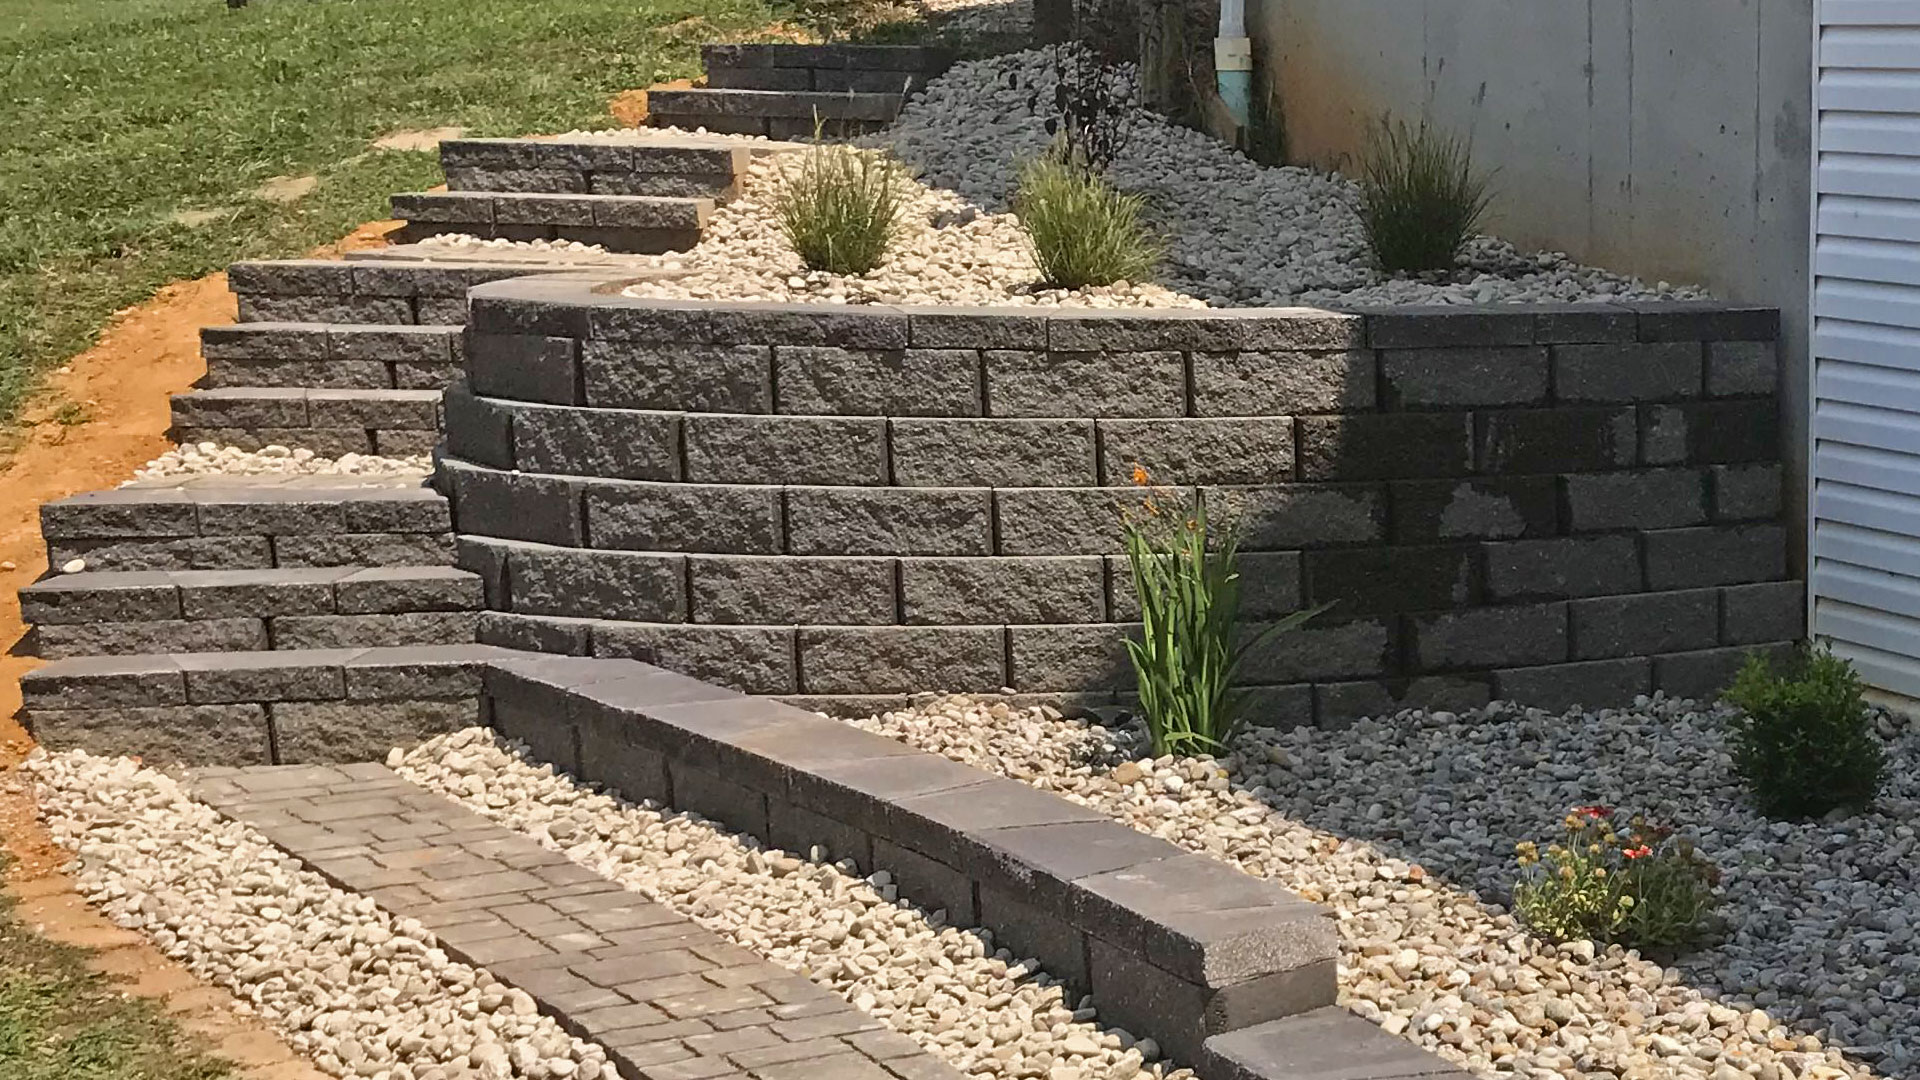 Custom retaining wall and steps hardscaping in New Albany, IN.